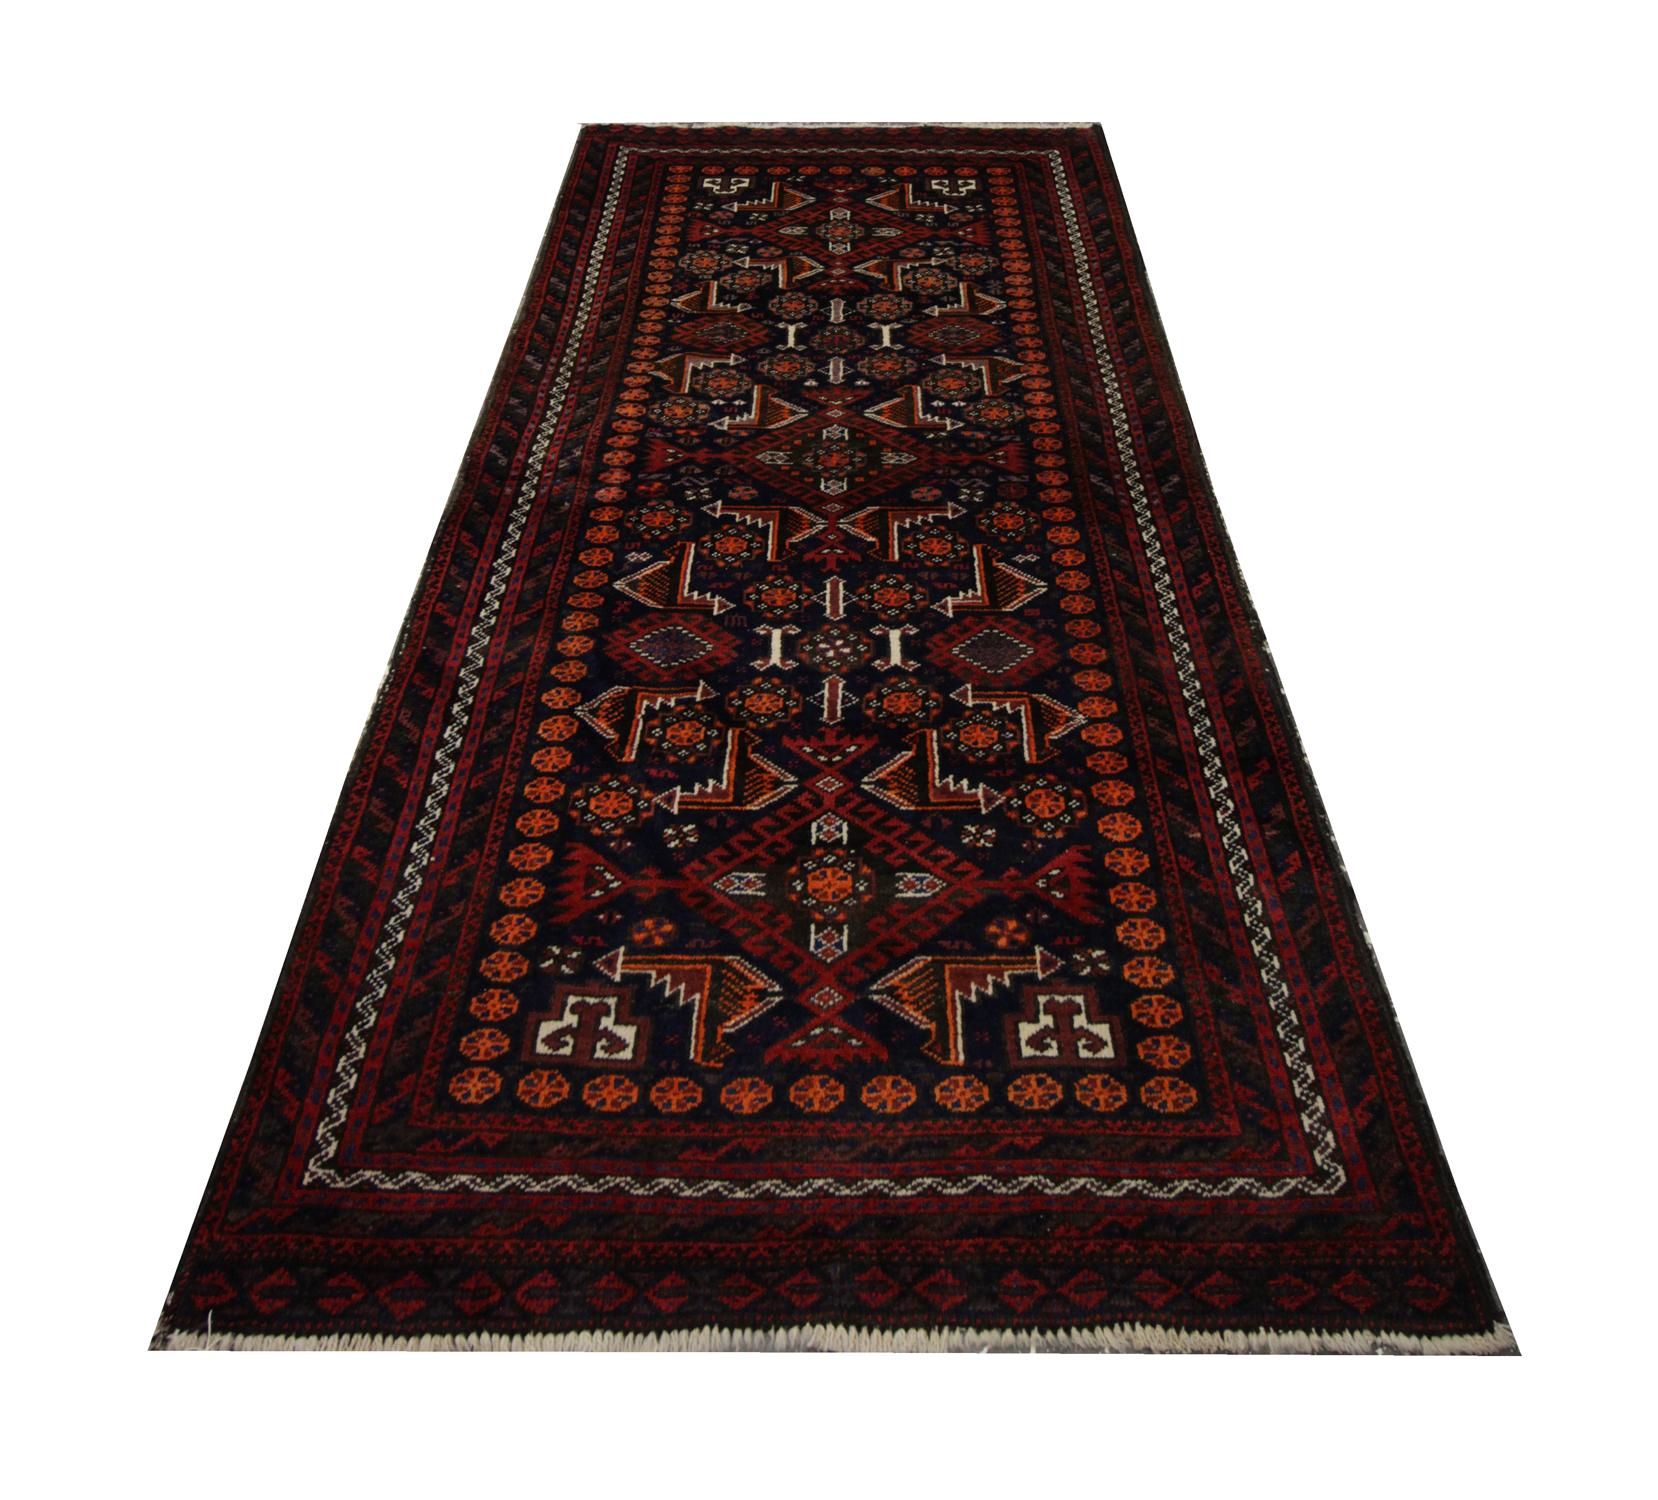 This fine wool area rug is a vintage piece woven in Afghanistan in the 1960s. The design features an intricate floral and tribal medallion design woven symmetrically in accents of orange, red and ivory. This has then been framed by a layered border